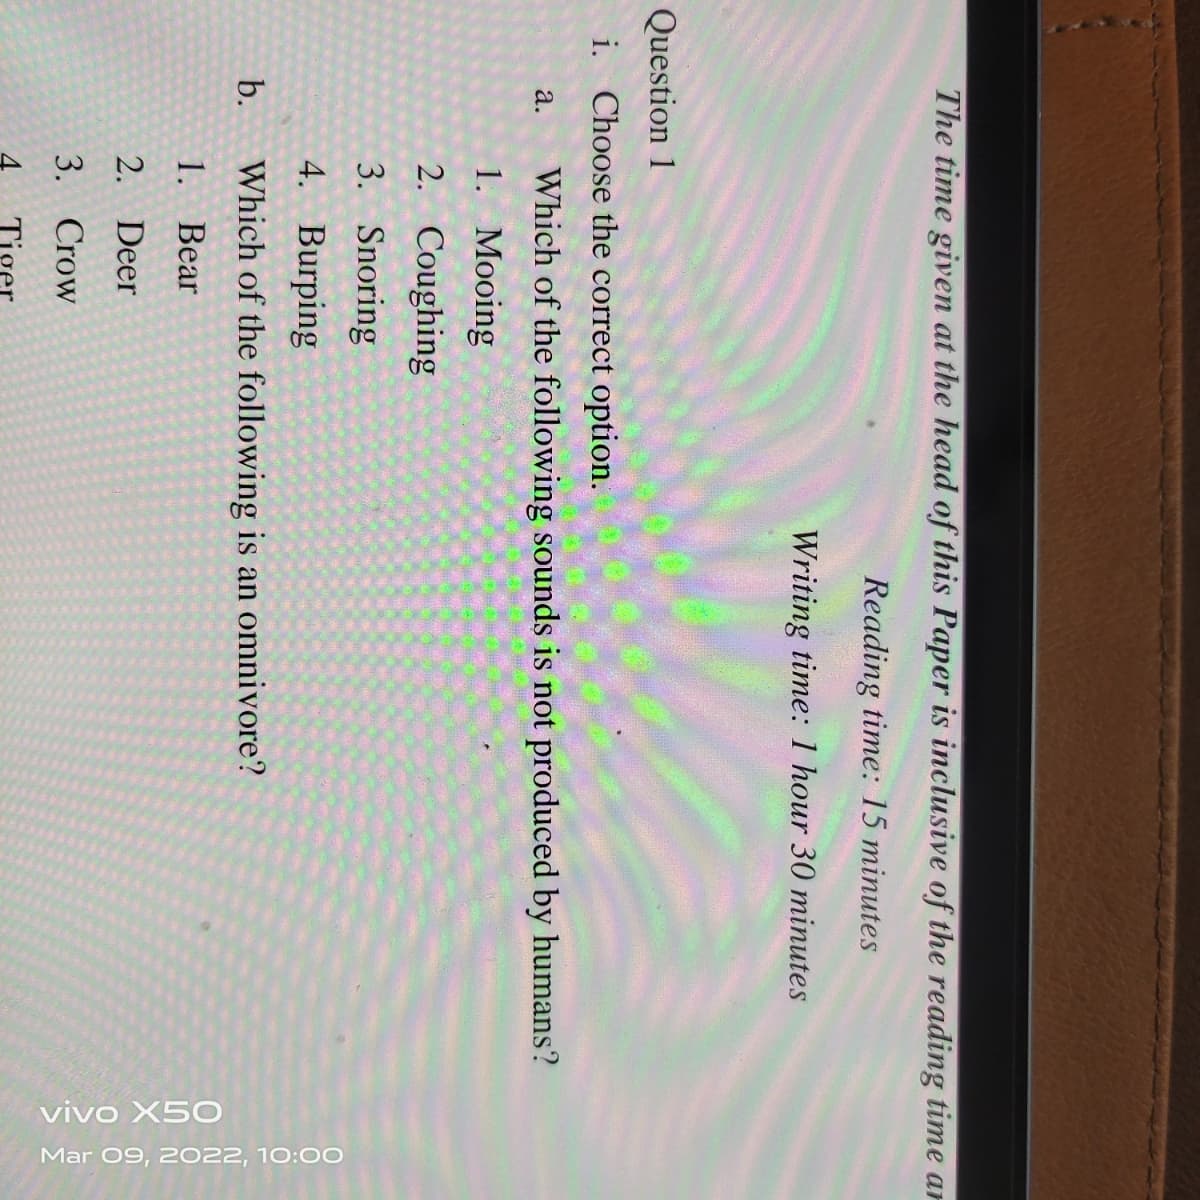 vivo X5O
Mar 09, 2022, 10:00
The time given at the head of this Paper is inclusive of the reading time ar
Reading time: 15 minutes
Writing time: 1 hour 30 minutes
Question 1
i. Choose the correct option.
a.
Which of the following sounds is not produced by humans?
1. Mooing
2. Coughing
3. Snoring
4. Burping
b.
Which of the following is an omnivore?
1. Bear
2. Deer
3. Crow
Tiger
